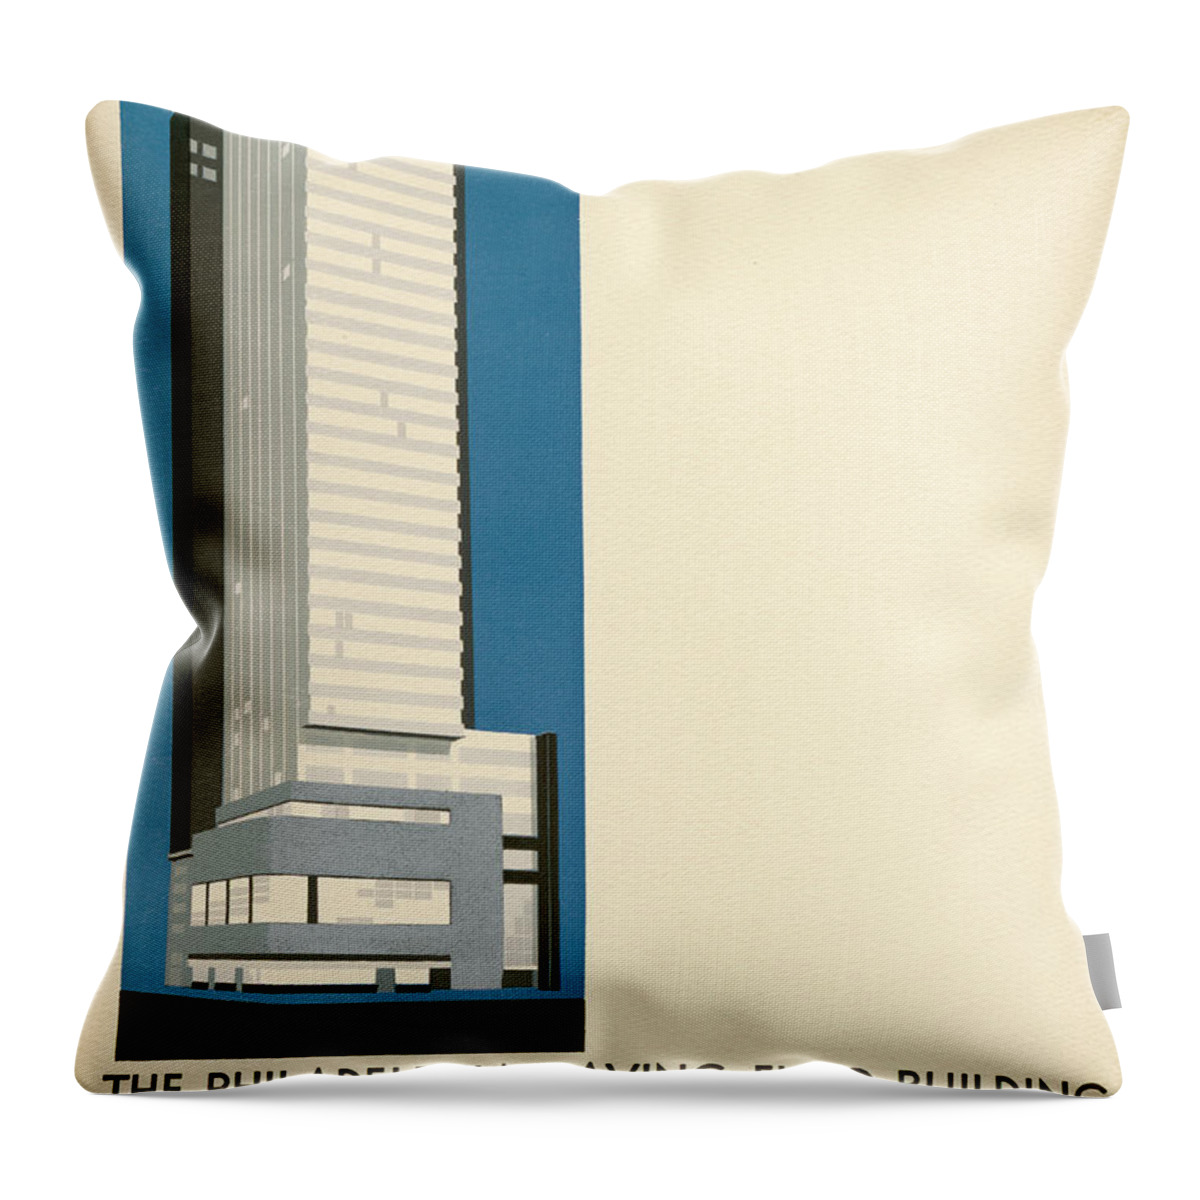 Psfs Throw Pillow featuring the mixed media Nothing More Modern The Philadelphia Savings Fund Society Building, 1932 by Howe and Lescaze